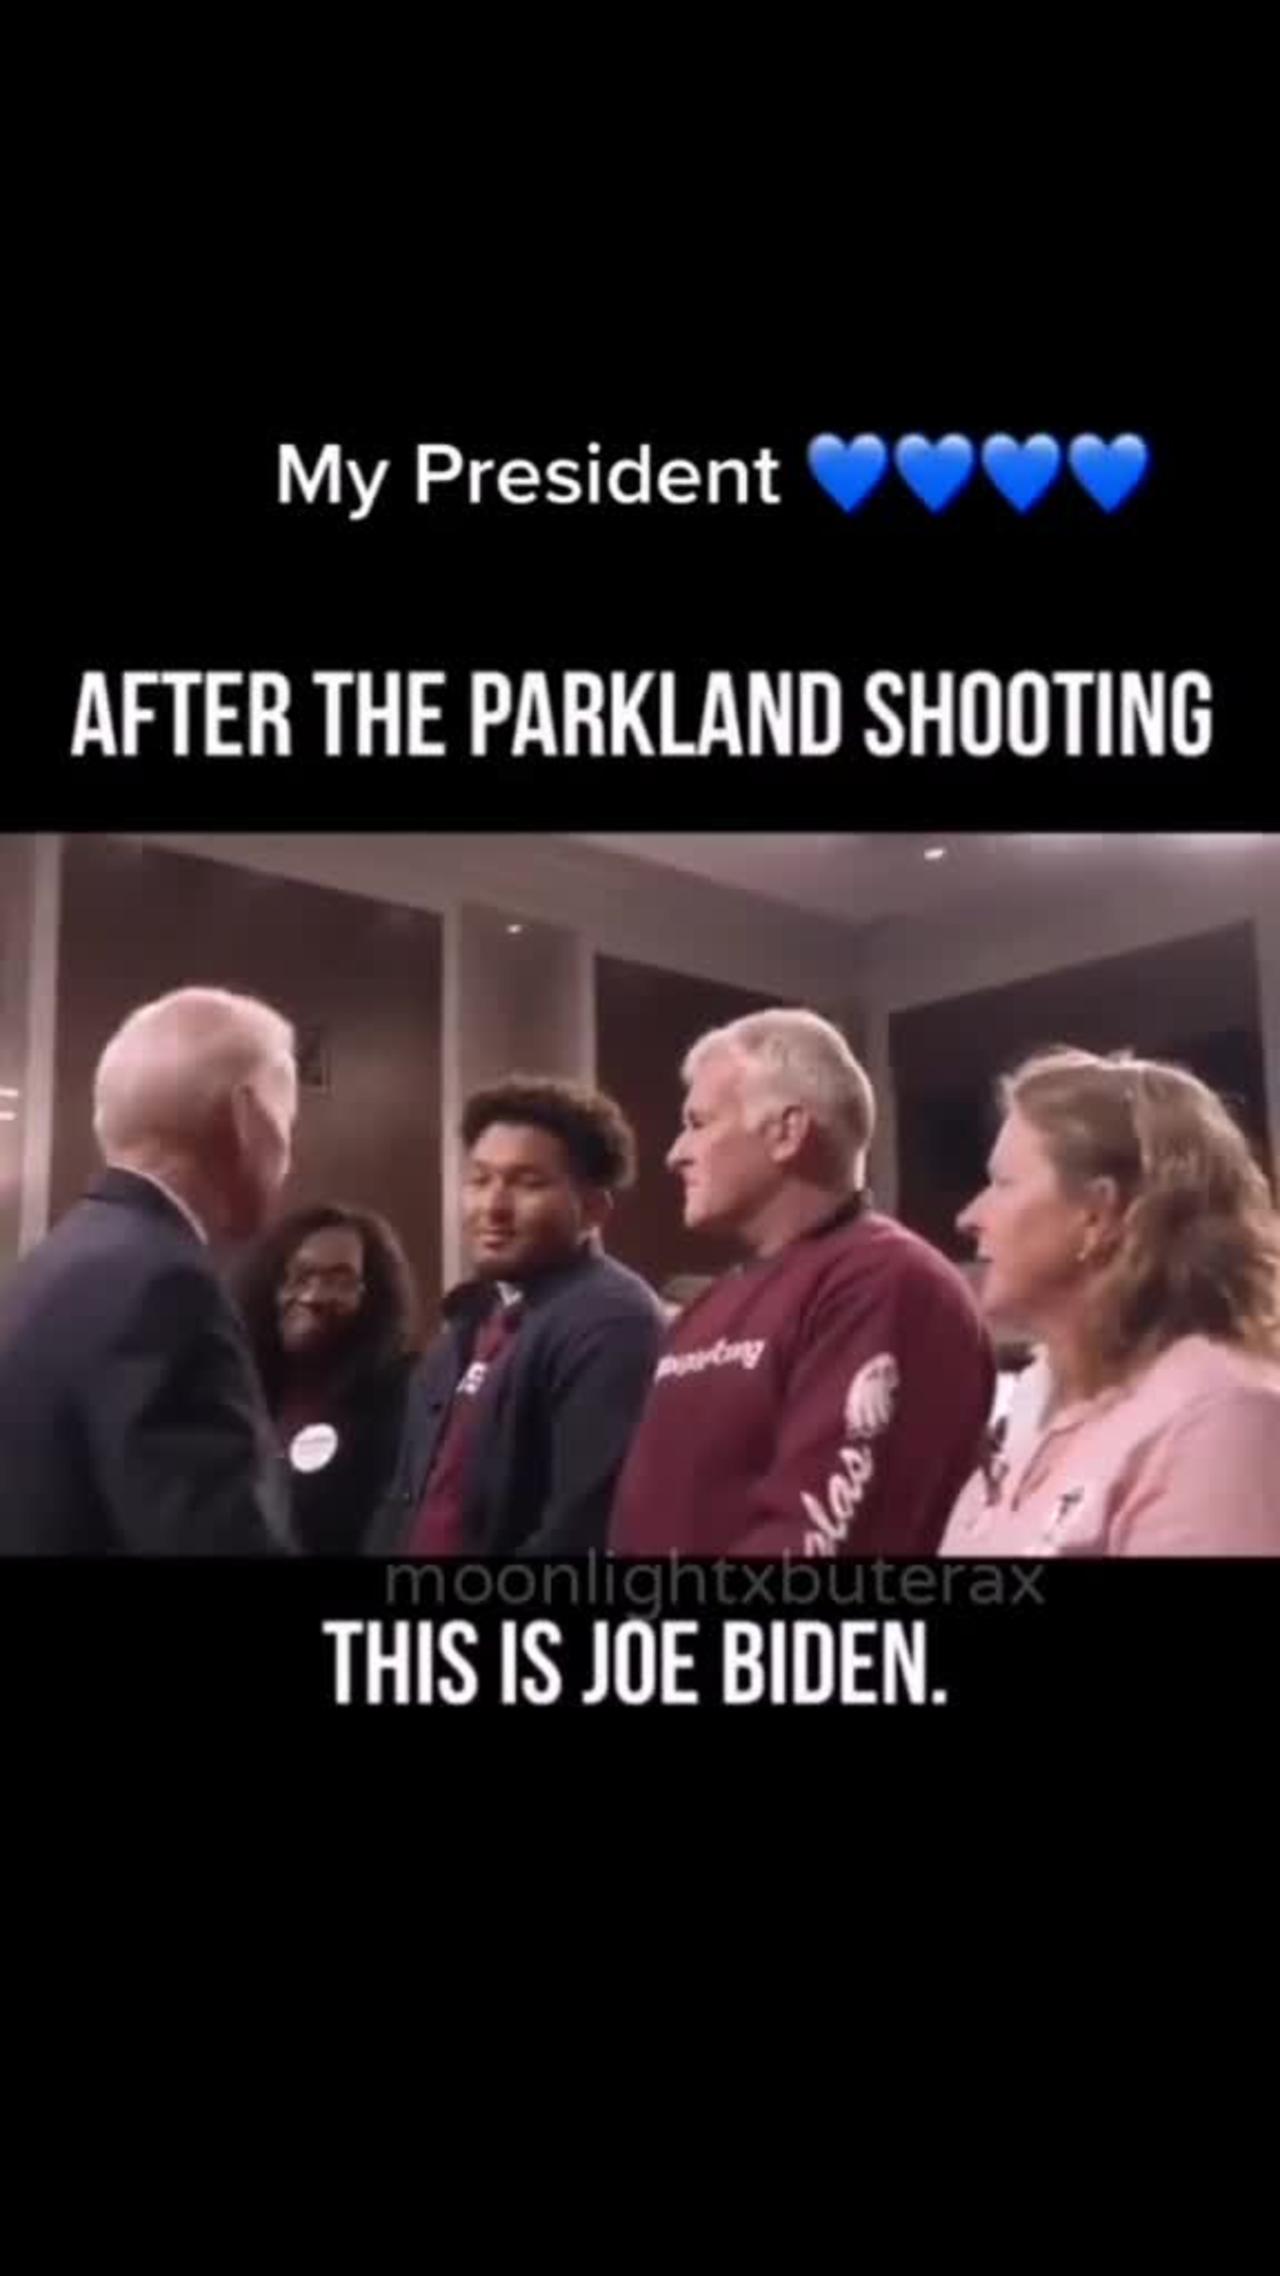 My president after the Parkland shooting